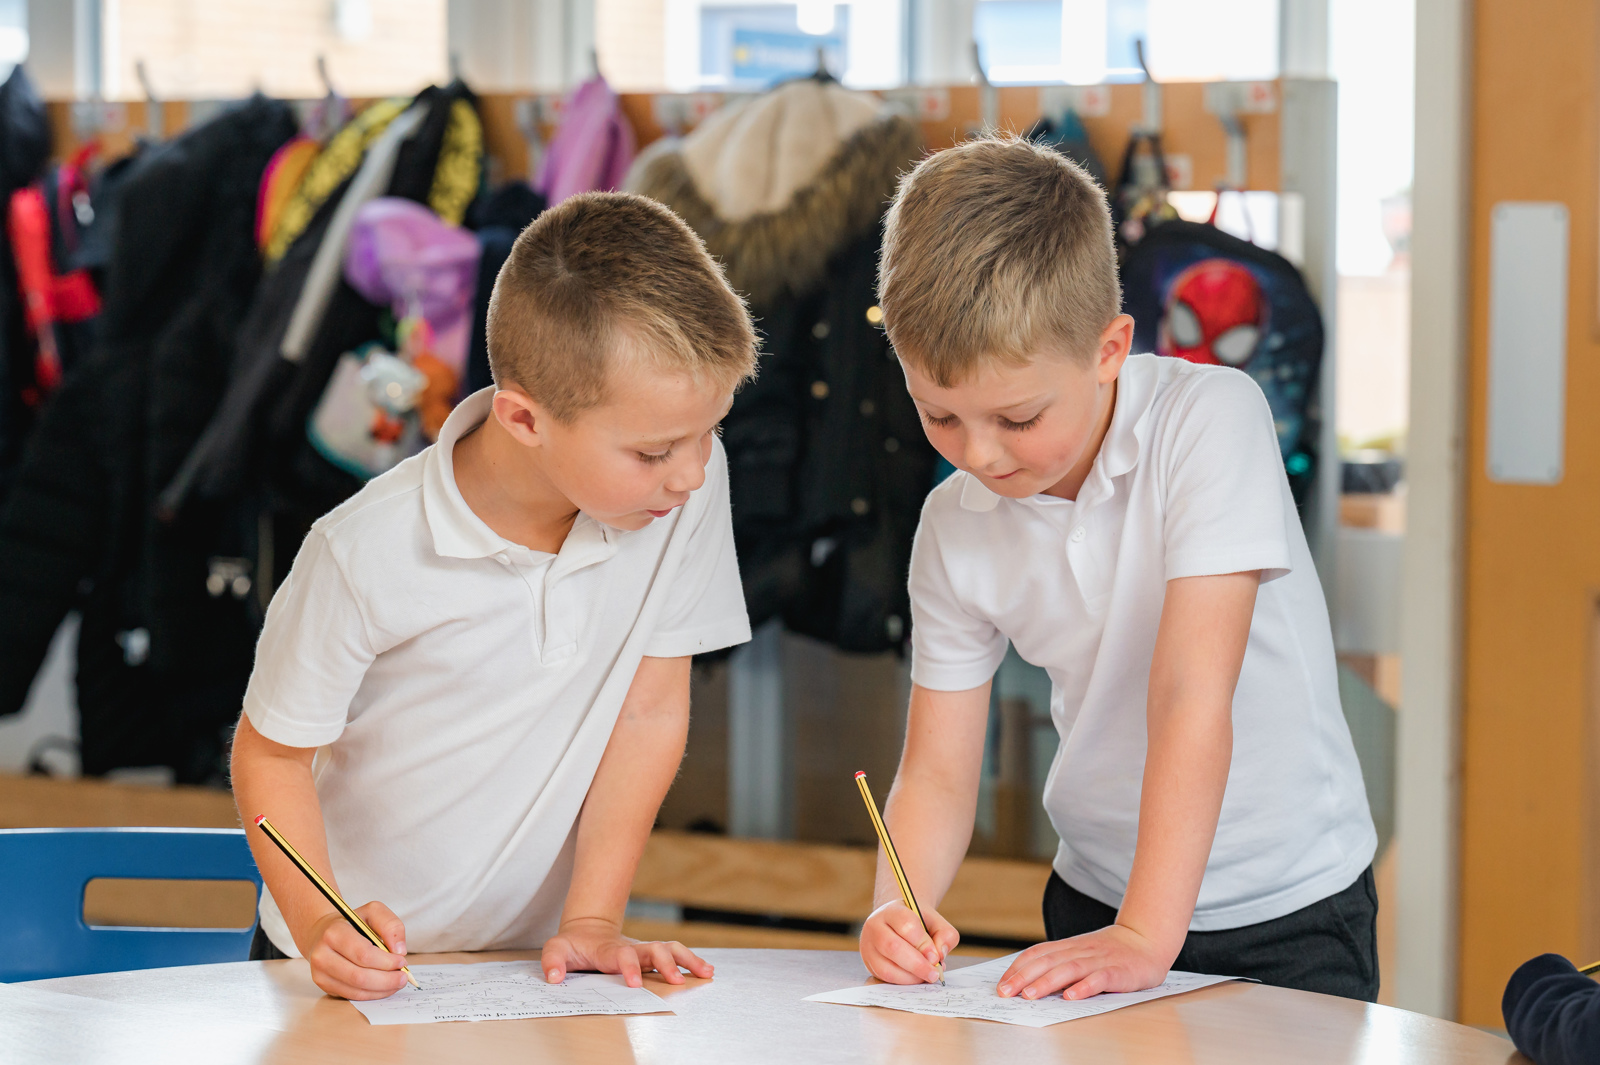 Two boys stand next to each other, each with pencil and paper, working on a learning task together